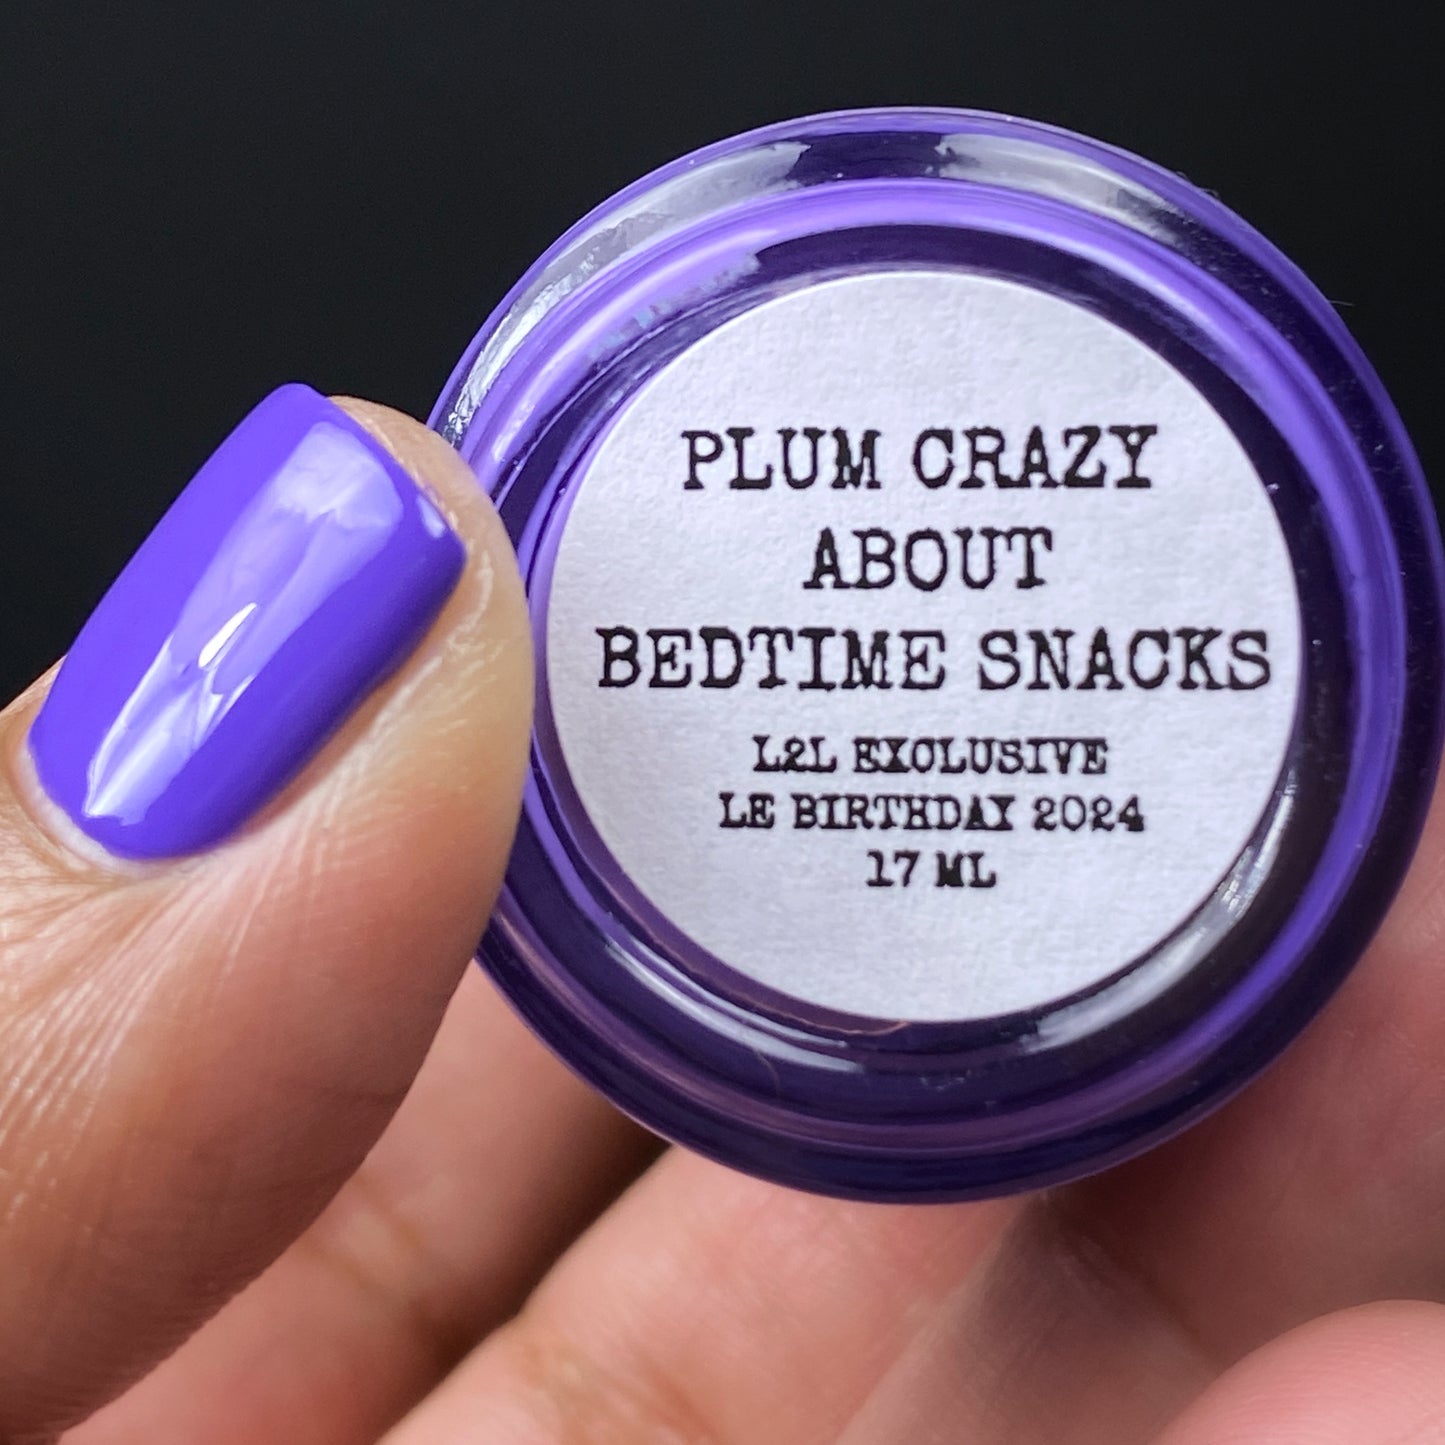 PLUM CRAZY ABOUT BEDTIME SNACKS